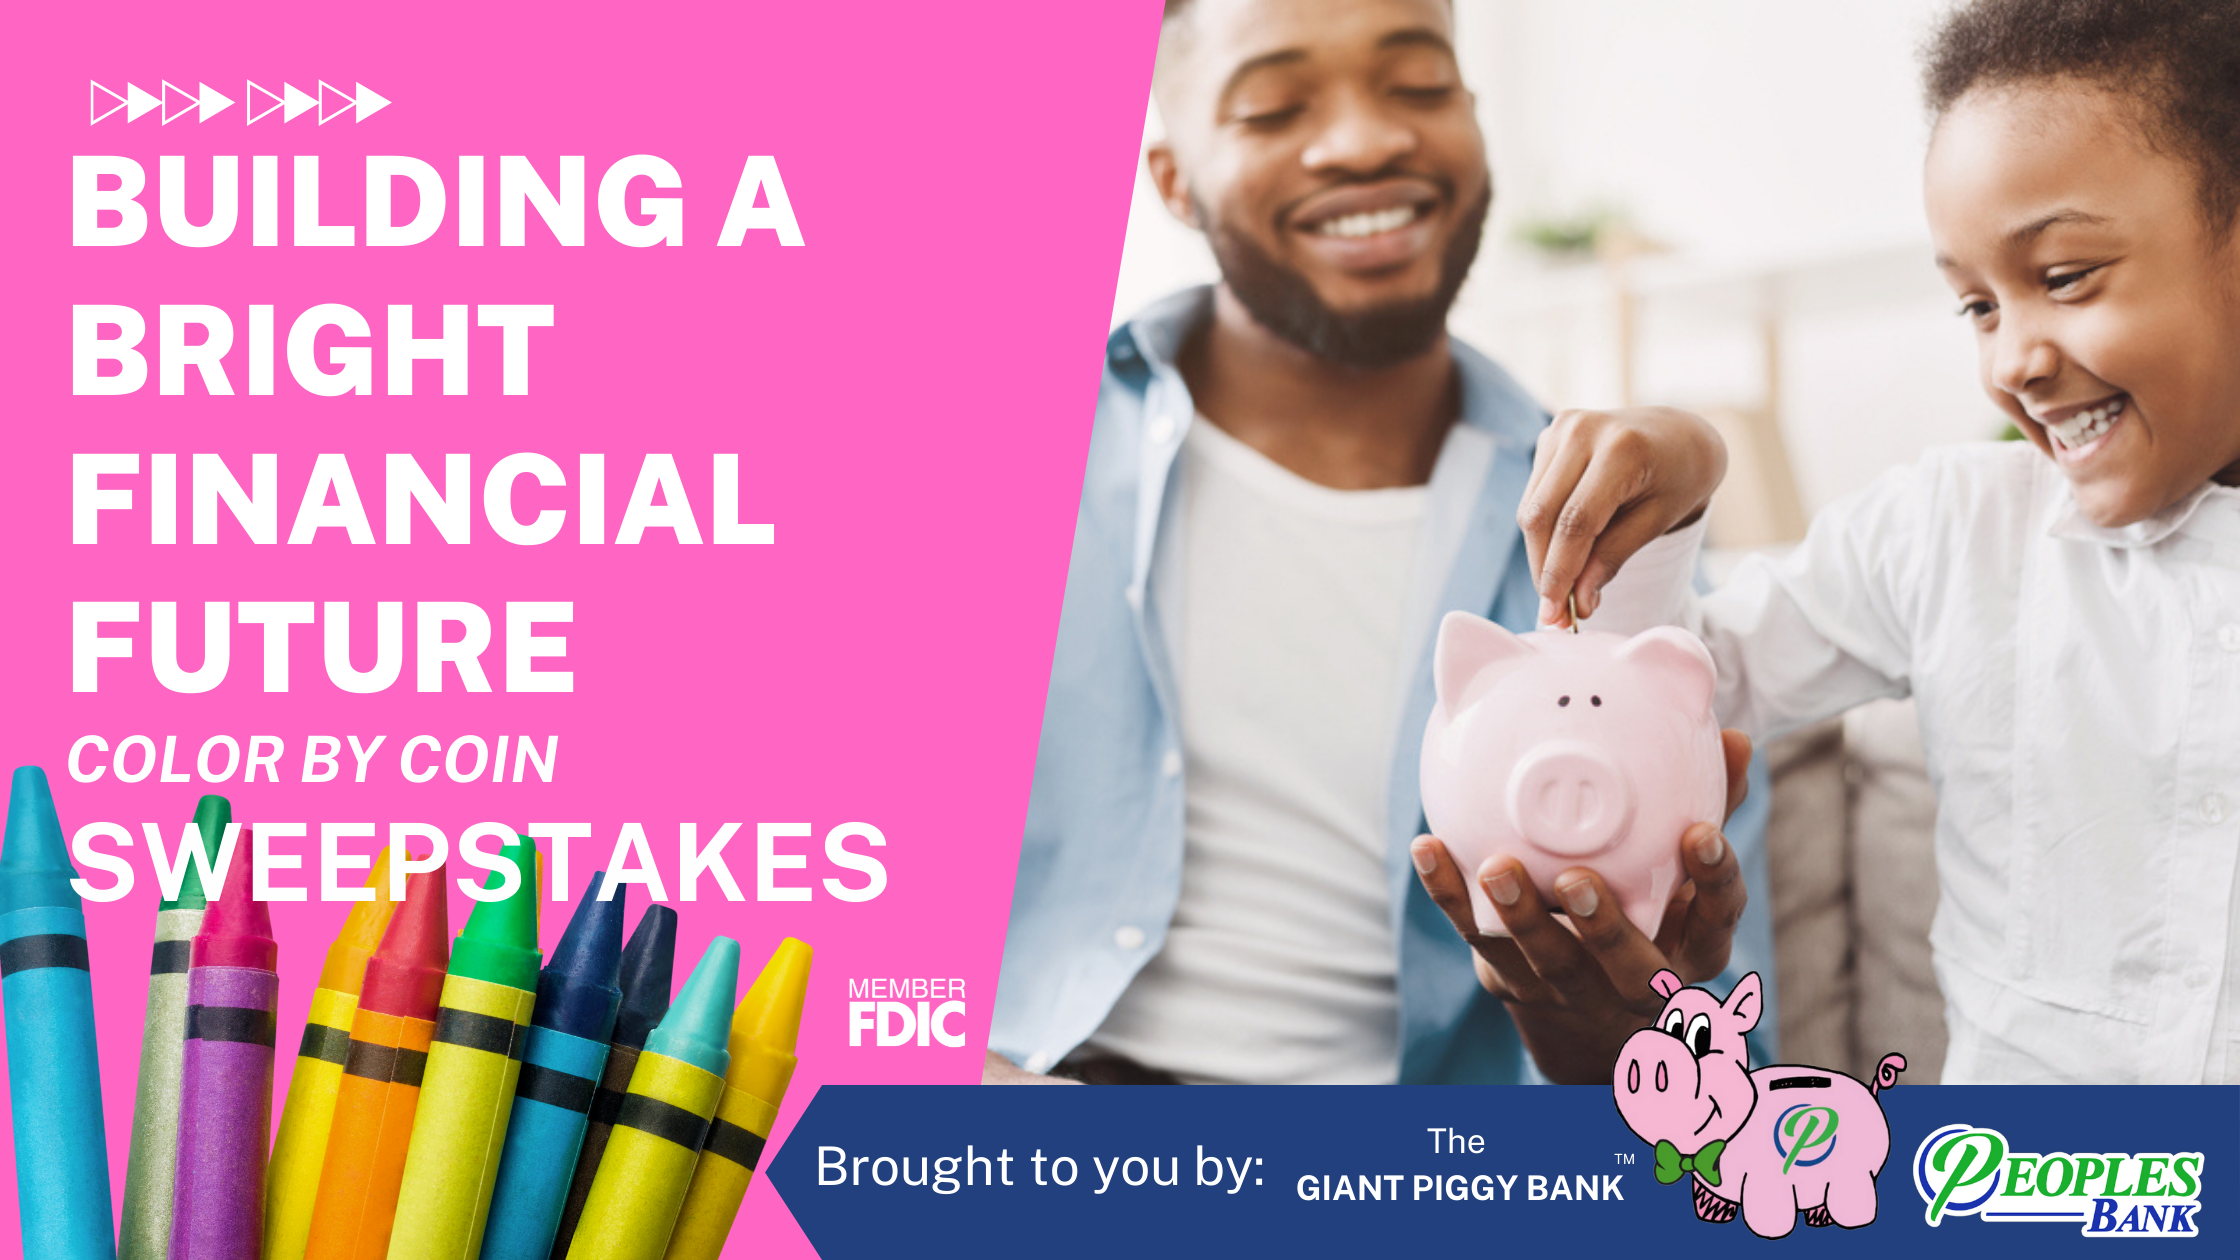 Building a Bright Financial Future: Color by Coin Sweepstakes!